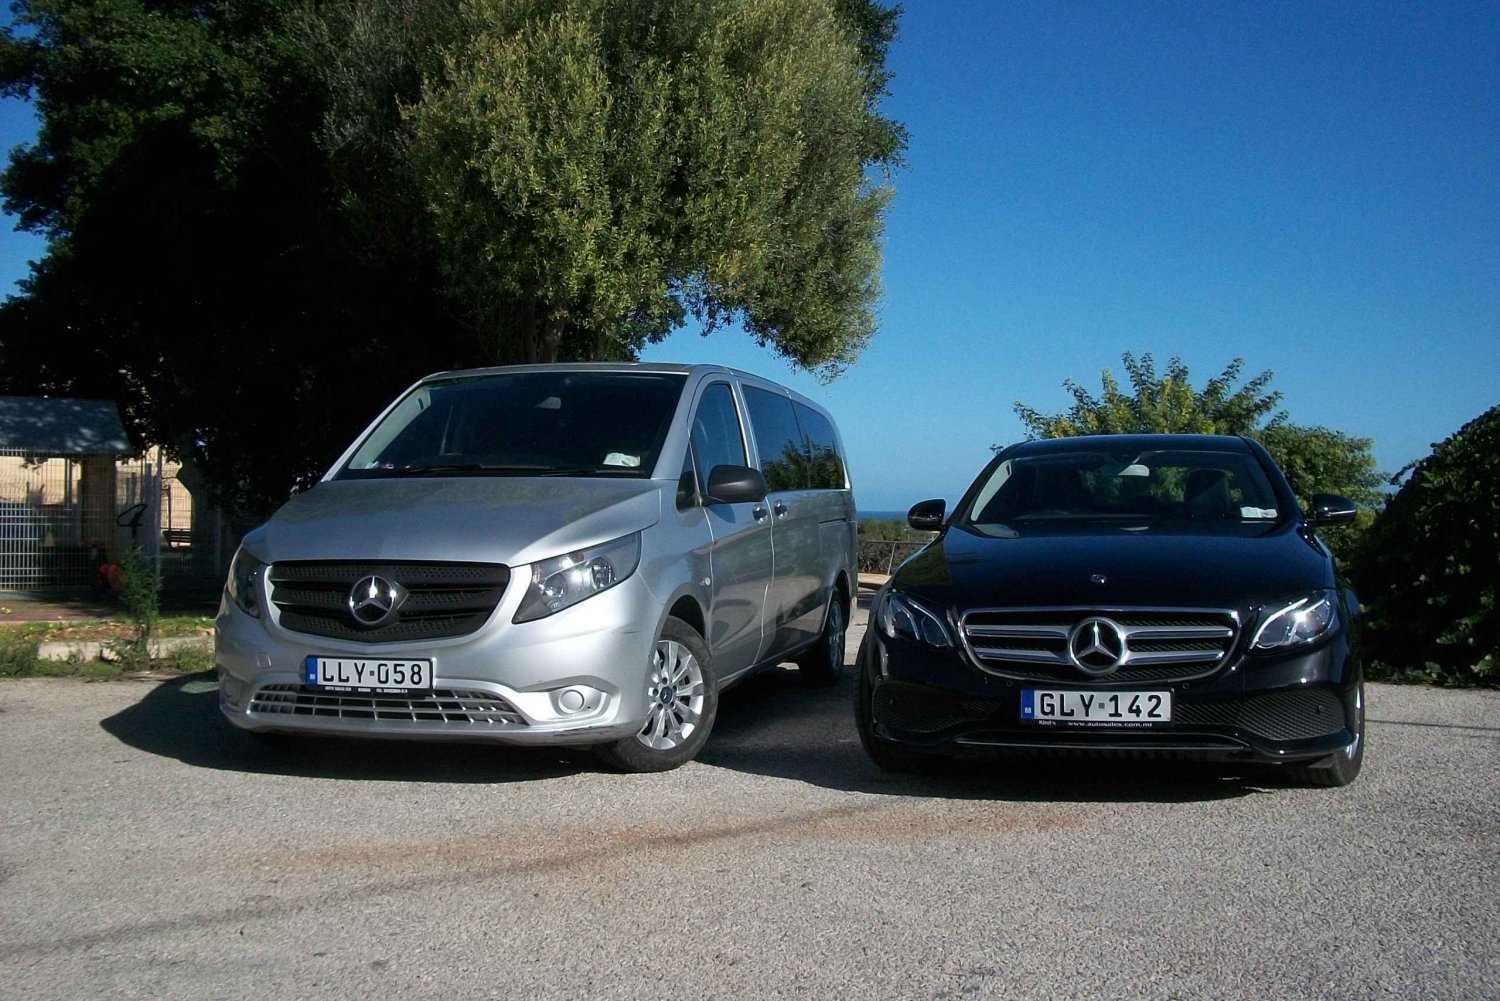 Shuttle Transfer between Malta Airport and Hotels